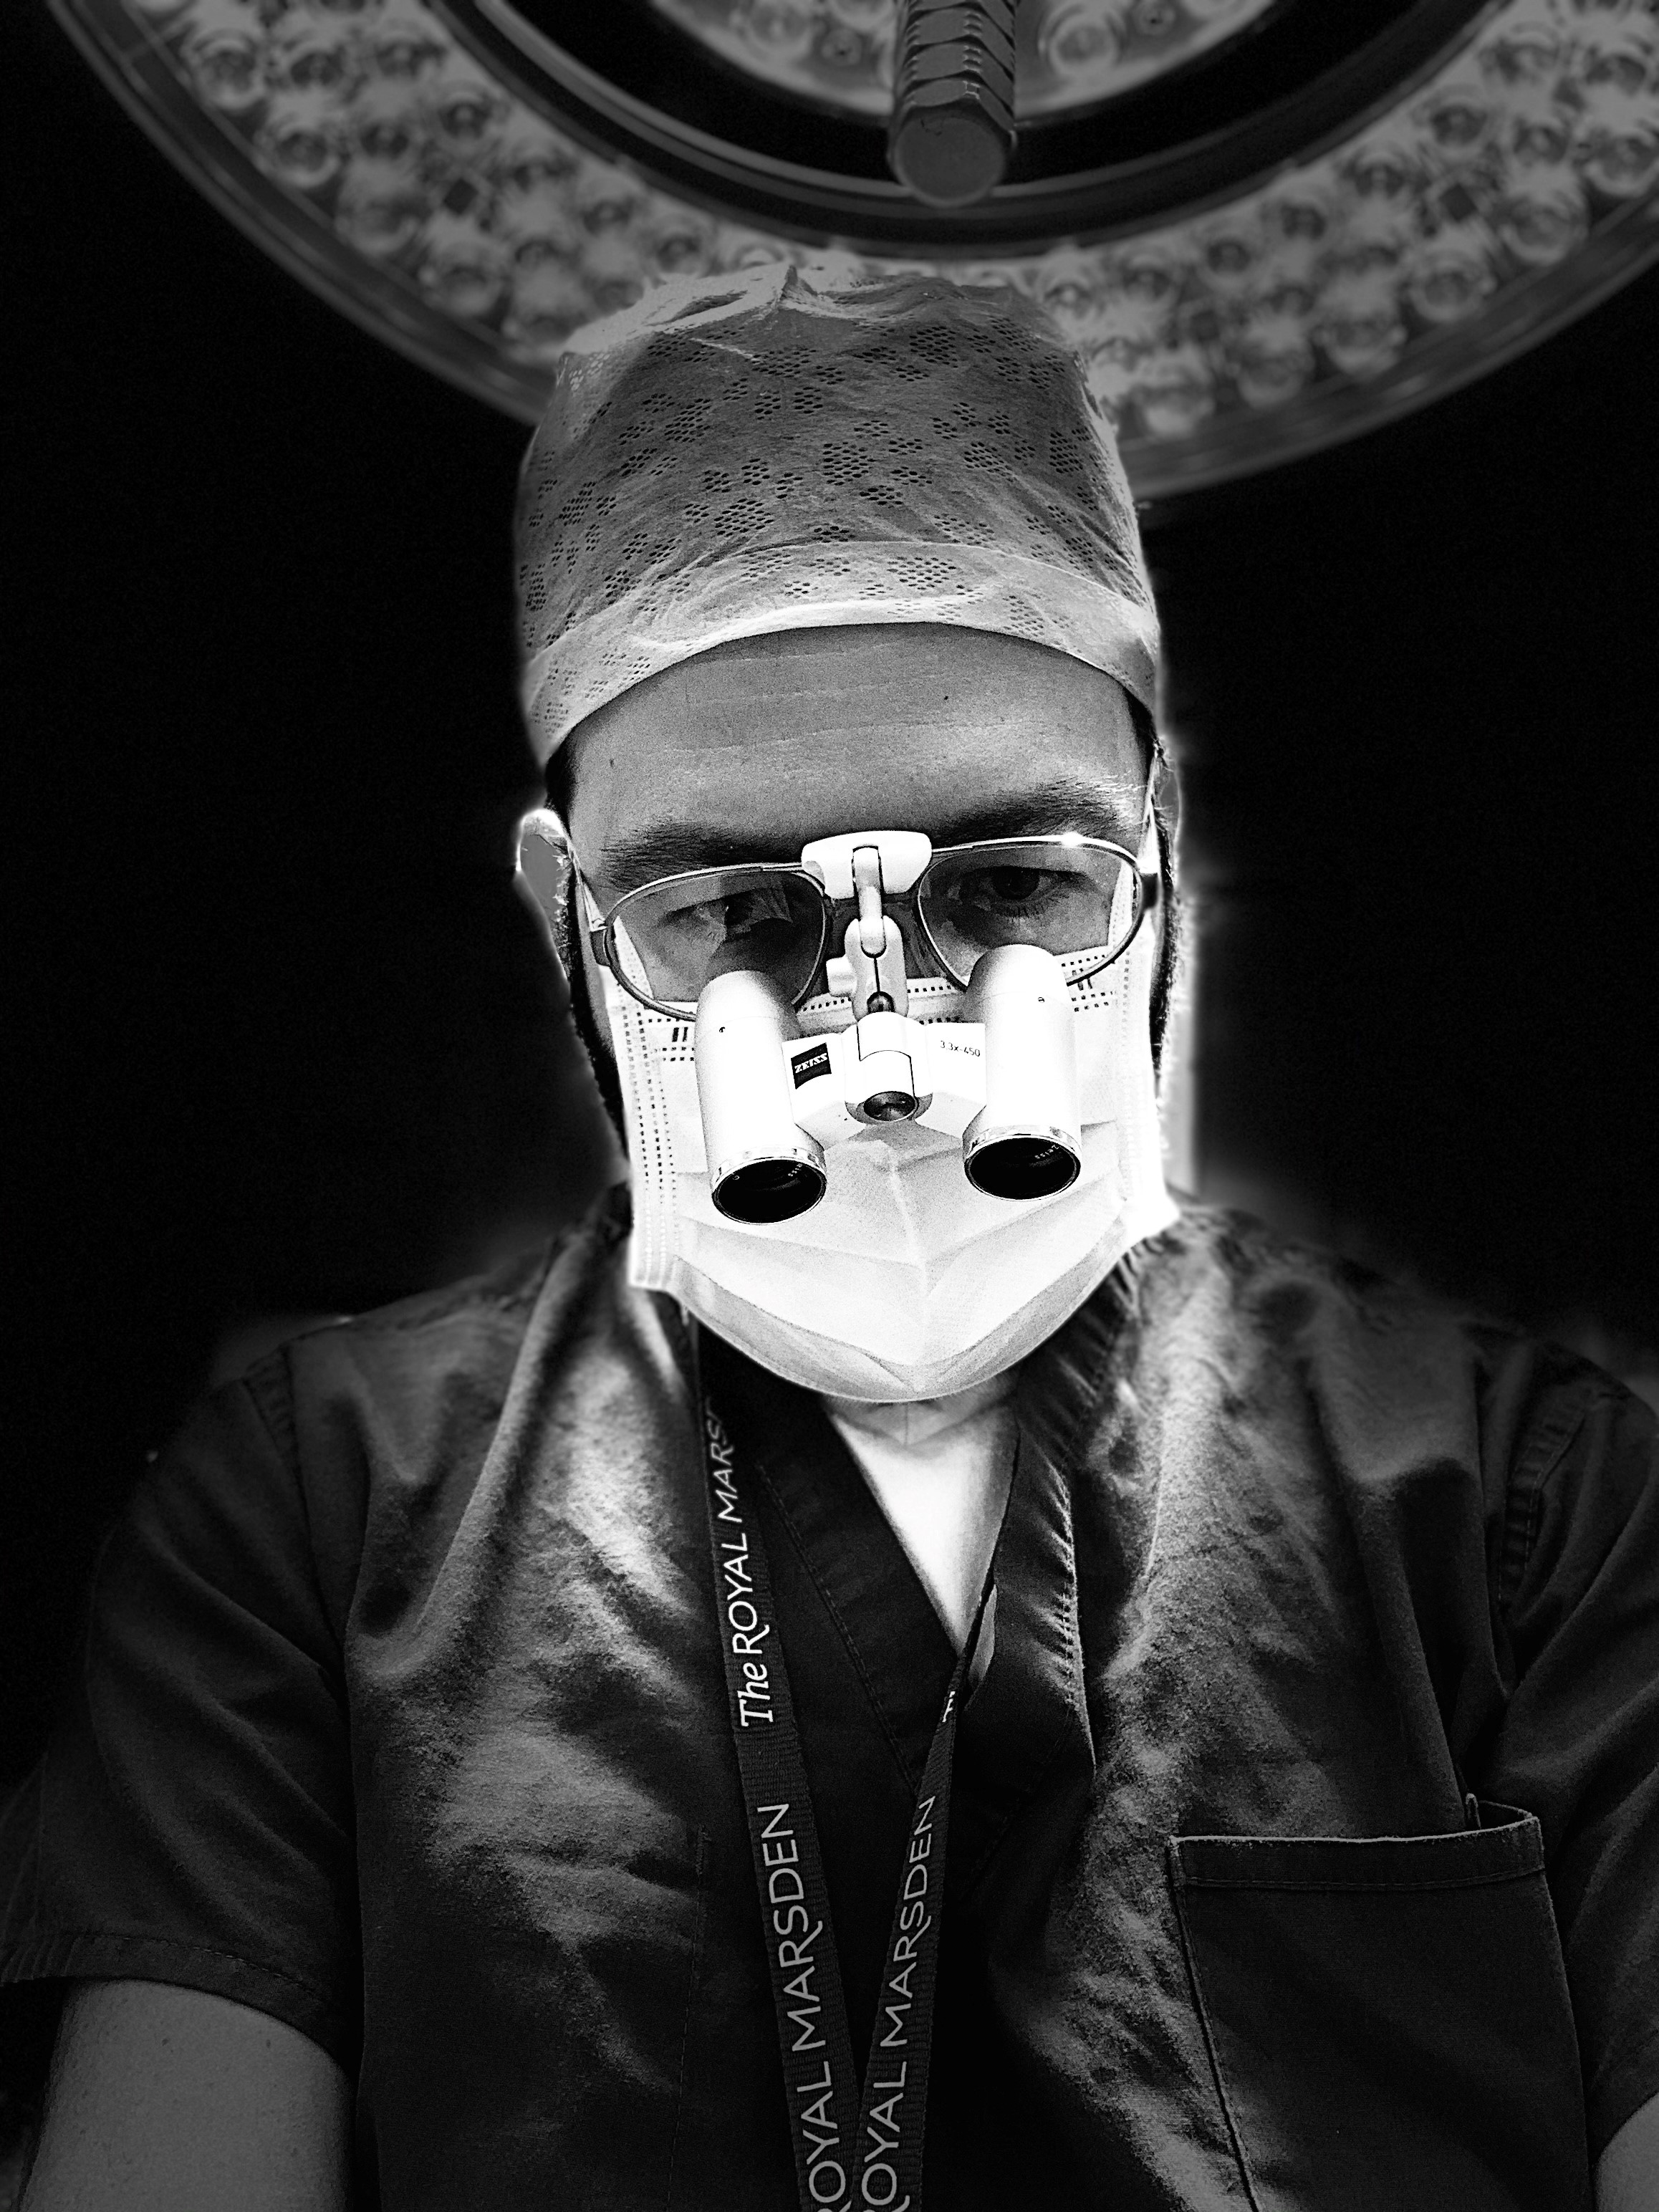 A black and white photo of a surgeon in an operating theatre. He is weirding a mask and glasses,